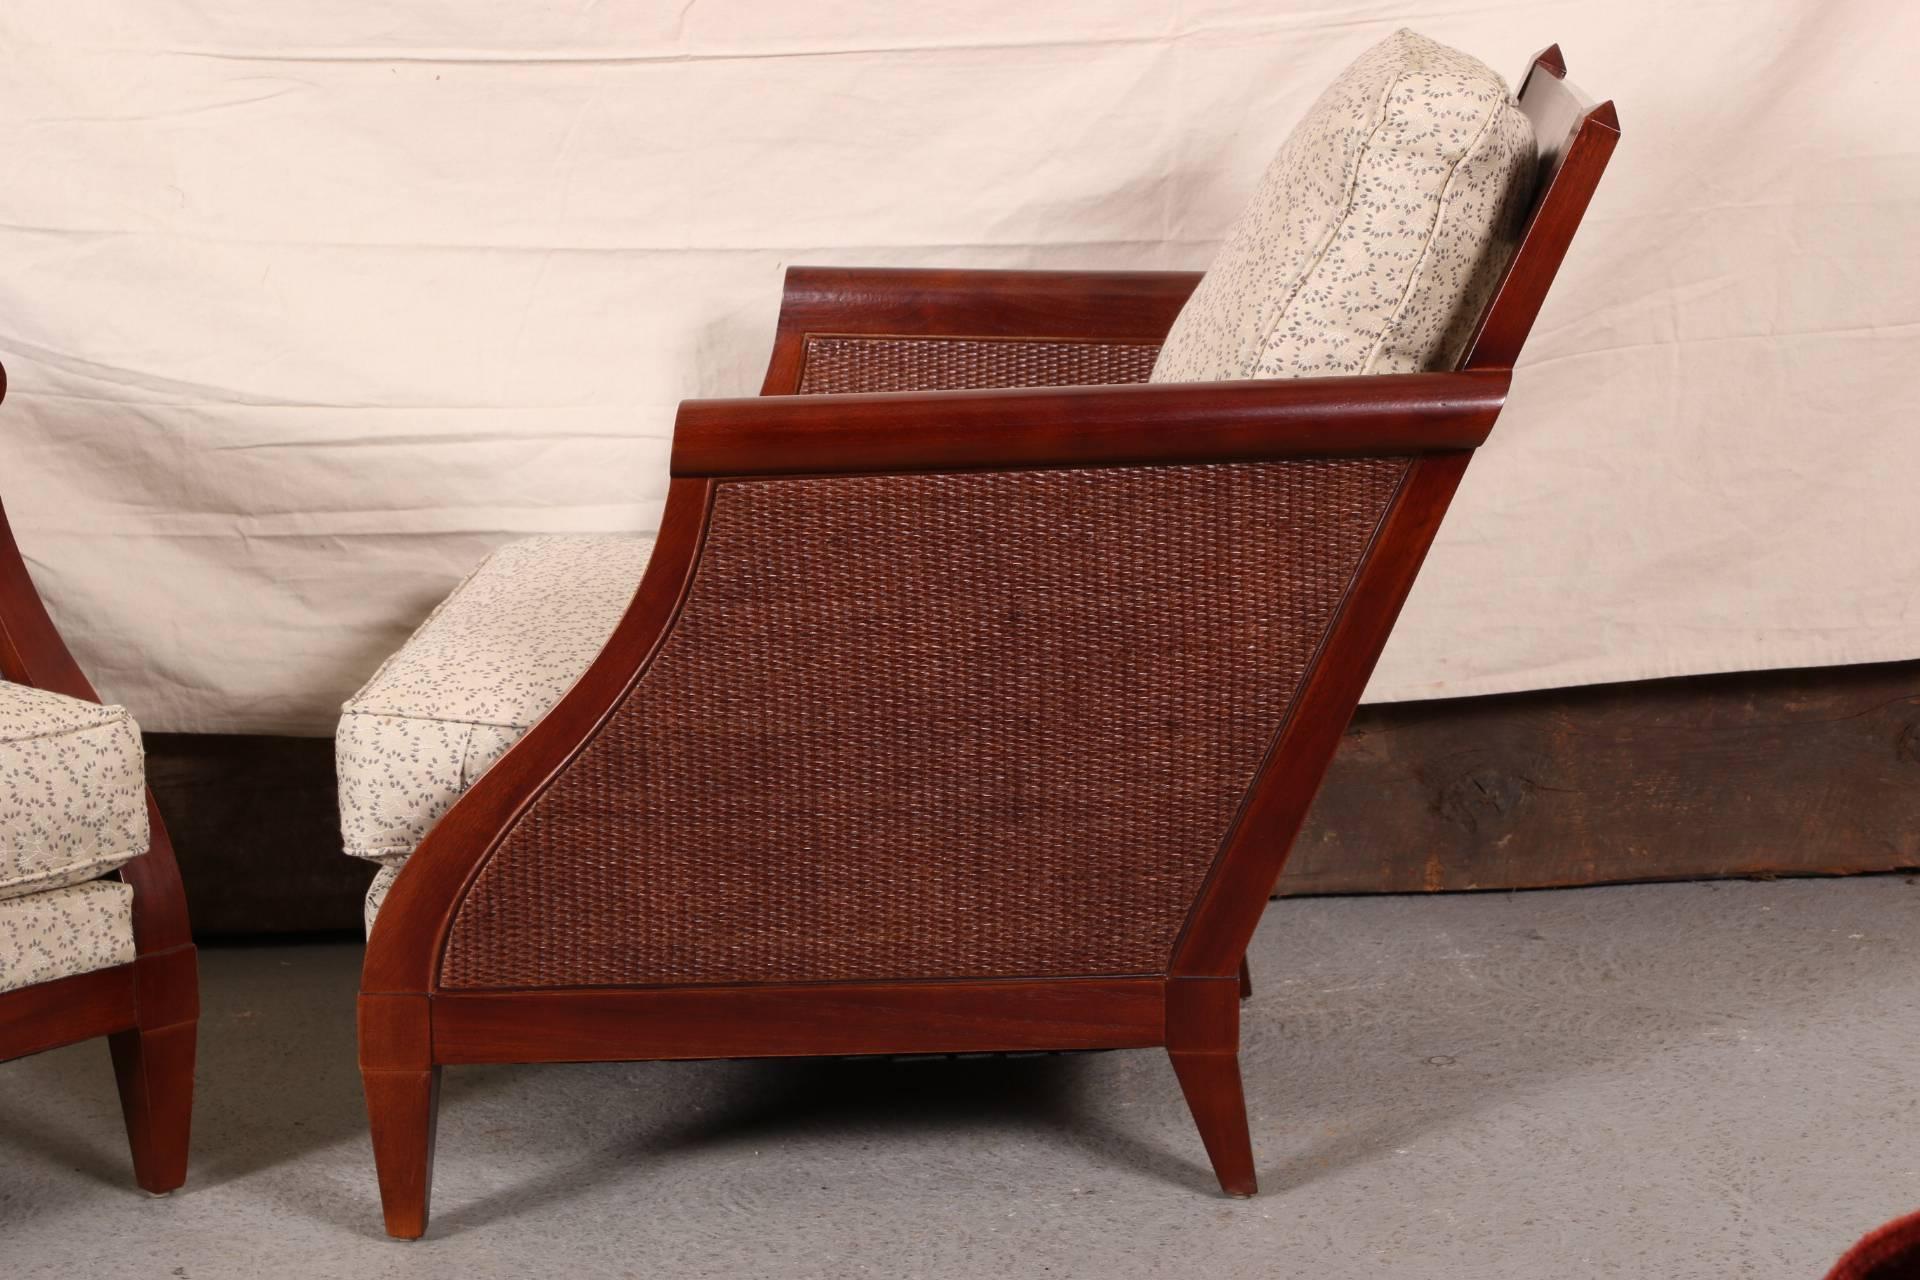 Mahogany with sloping slatted backs and shaped and woven rattan sides. Raised on square tapering legs. With gray on beige upholstery.
Condition: a few scrapes to the lower frame front edges.